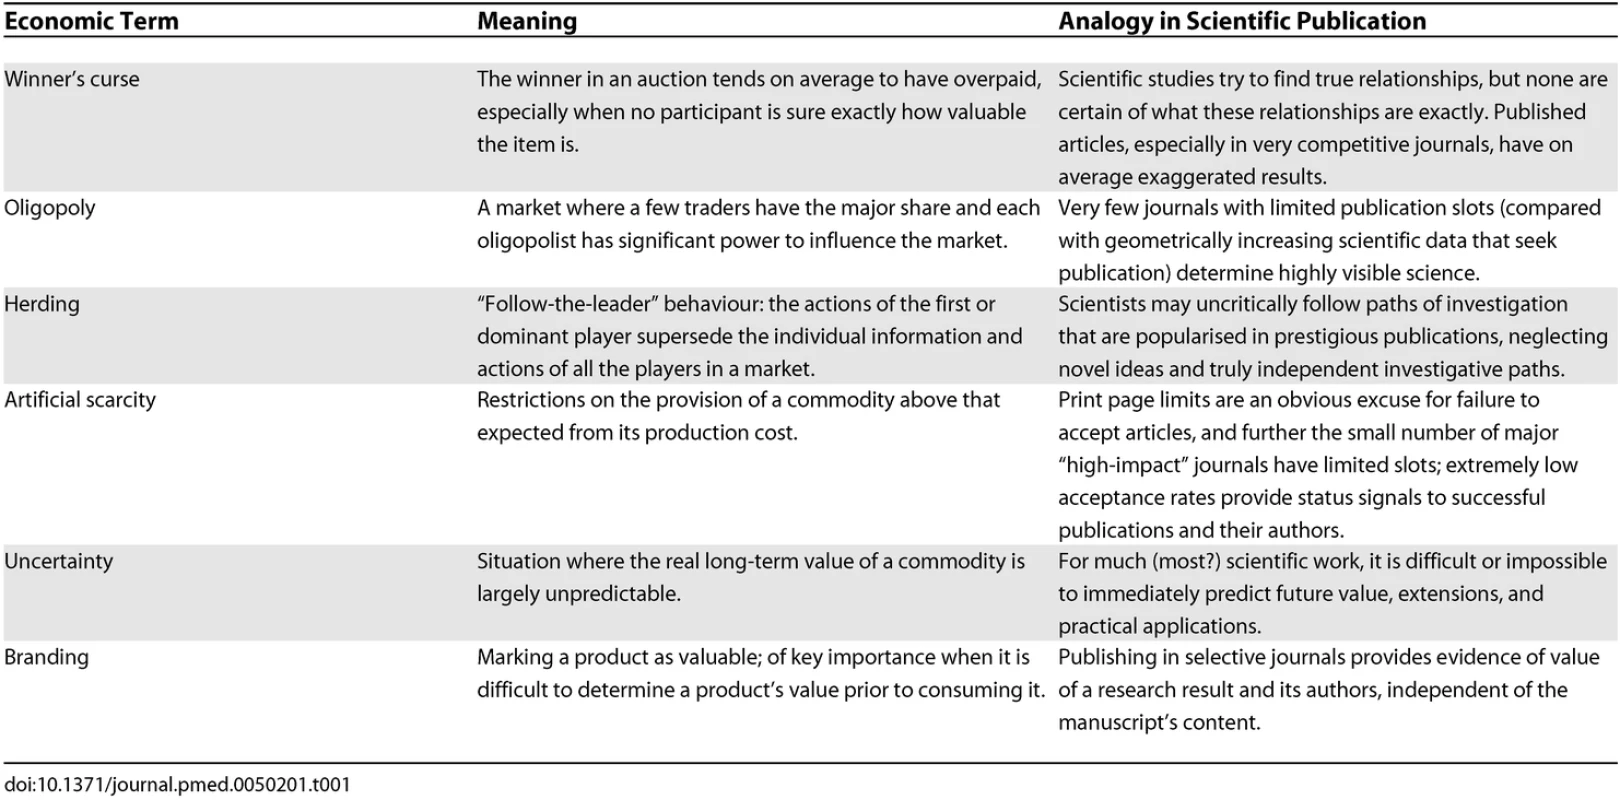 Economic Terms and Analogies in Scientific Publication